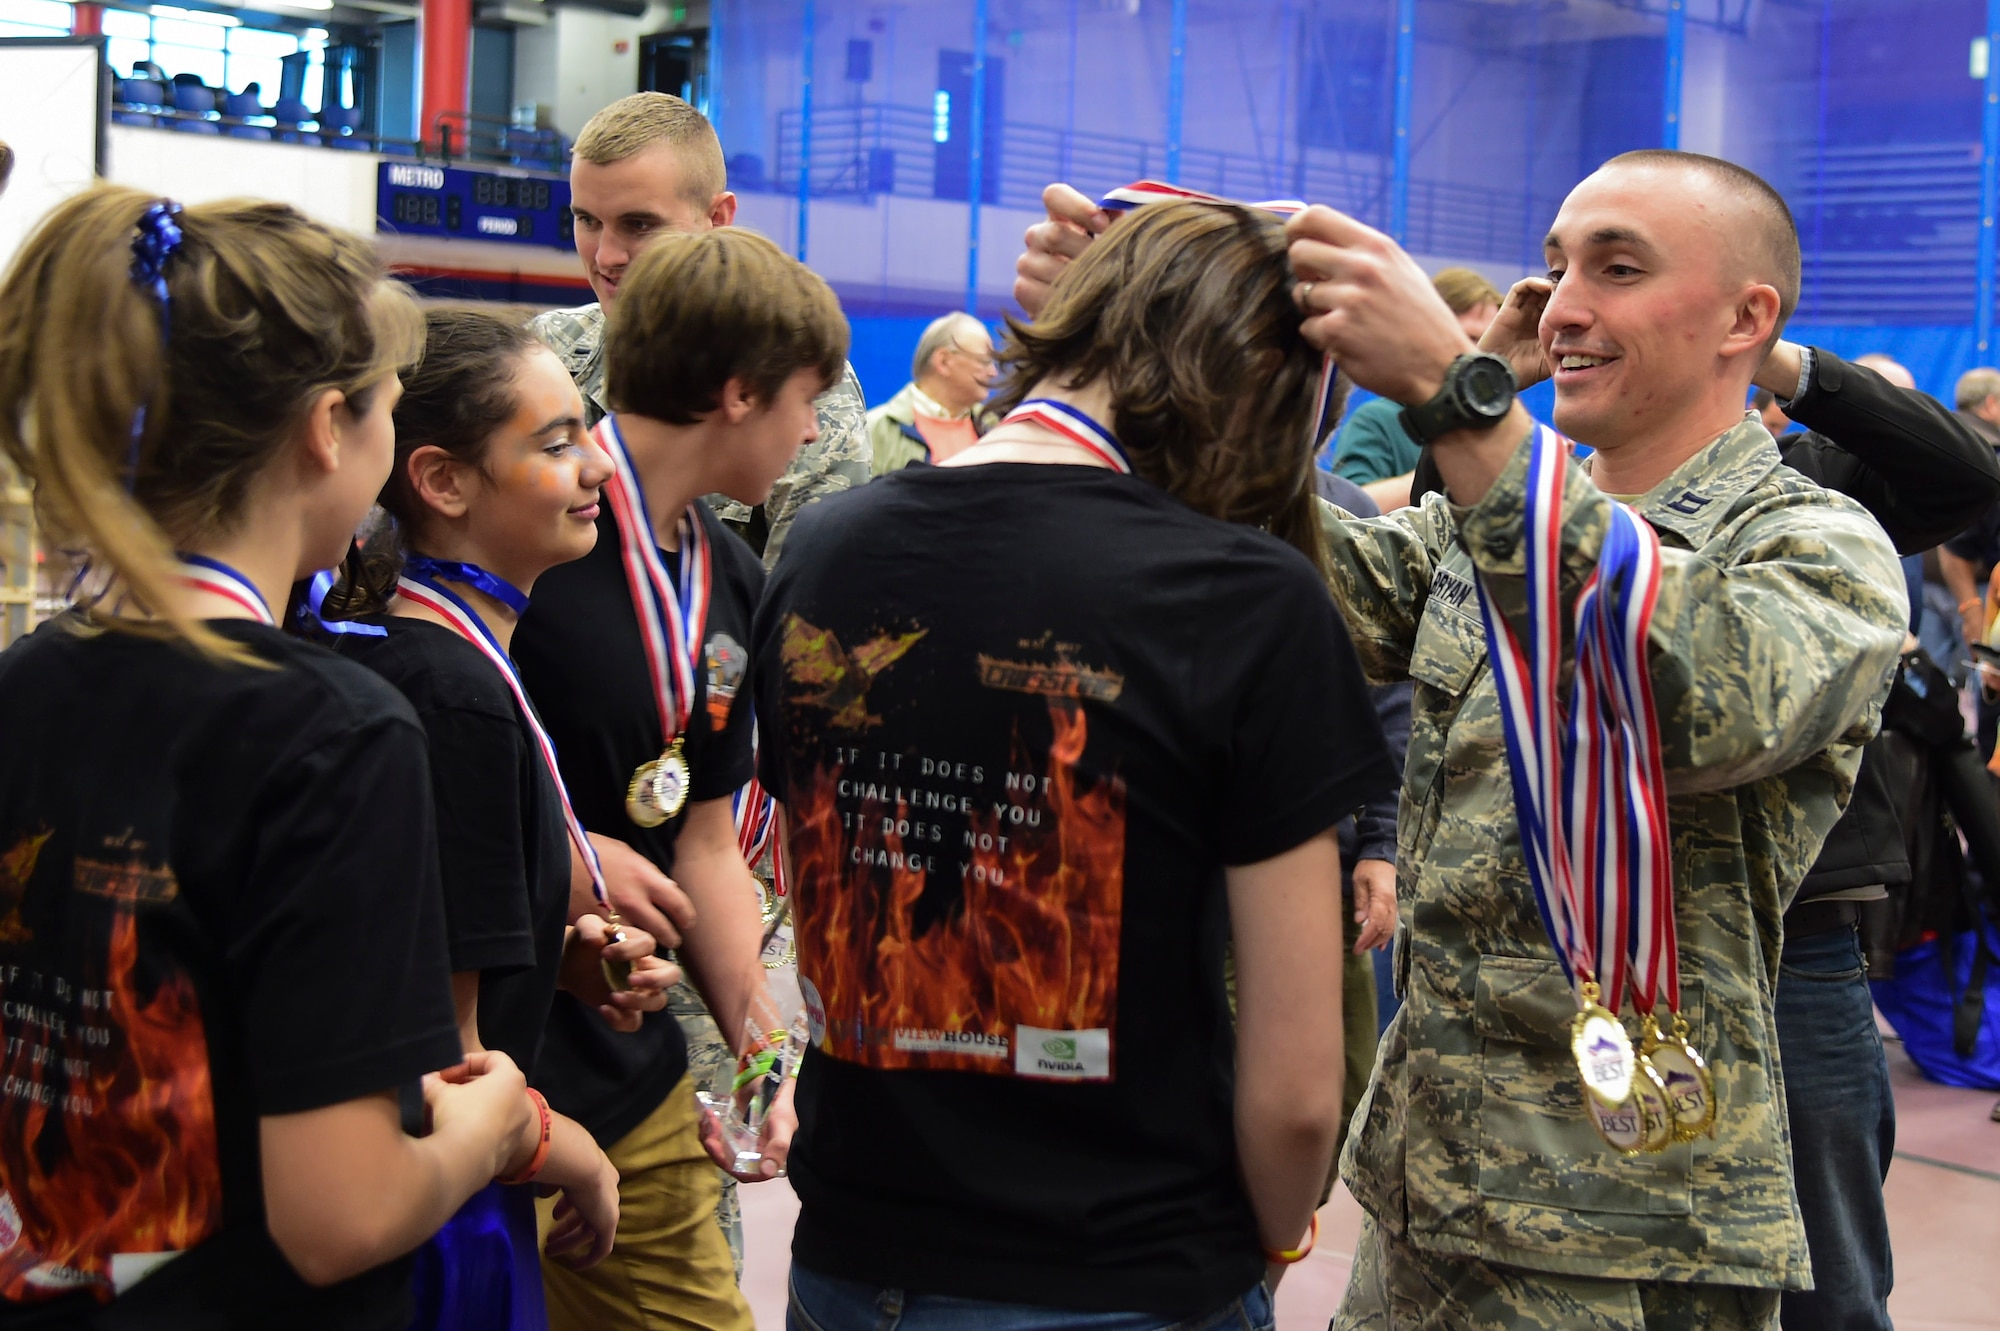 Twenty-six high school teams and one middle school team, from the state of Colorado, were each given six weeks to build a robot from the same provided materials. (U.S. Air Force photo by Airman 1st Class Holden S. Faul/ Released)